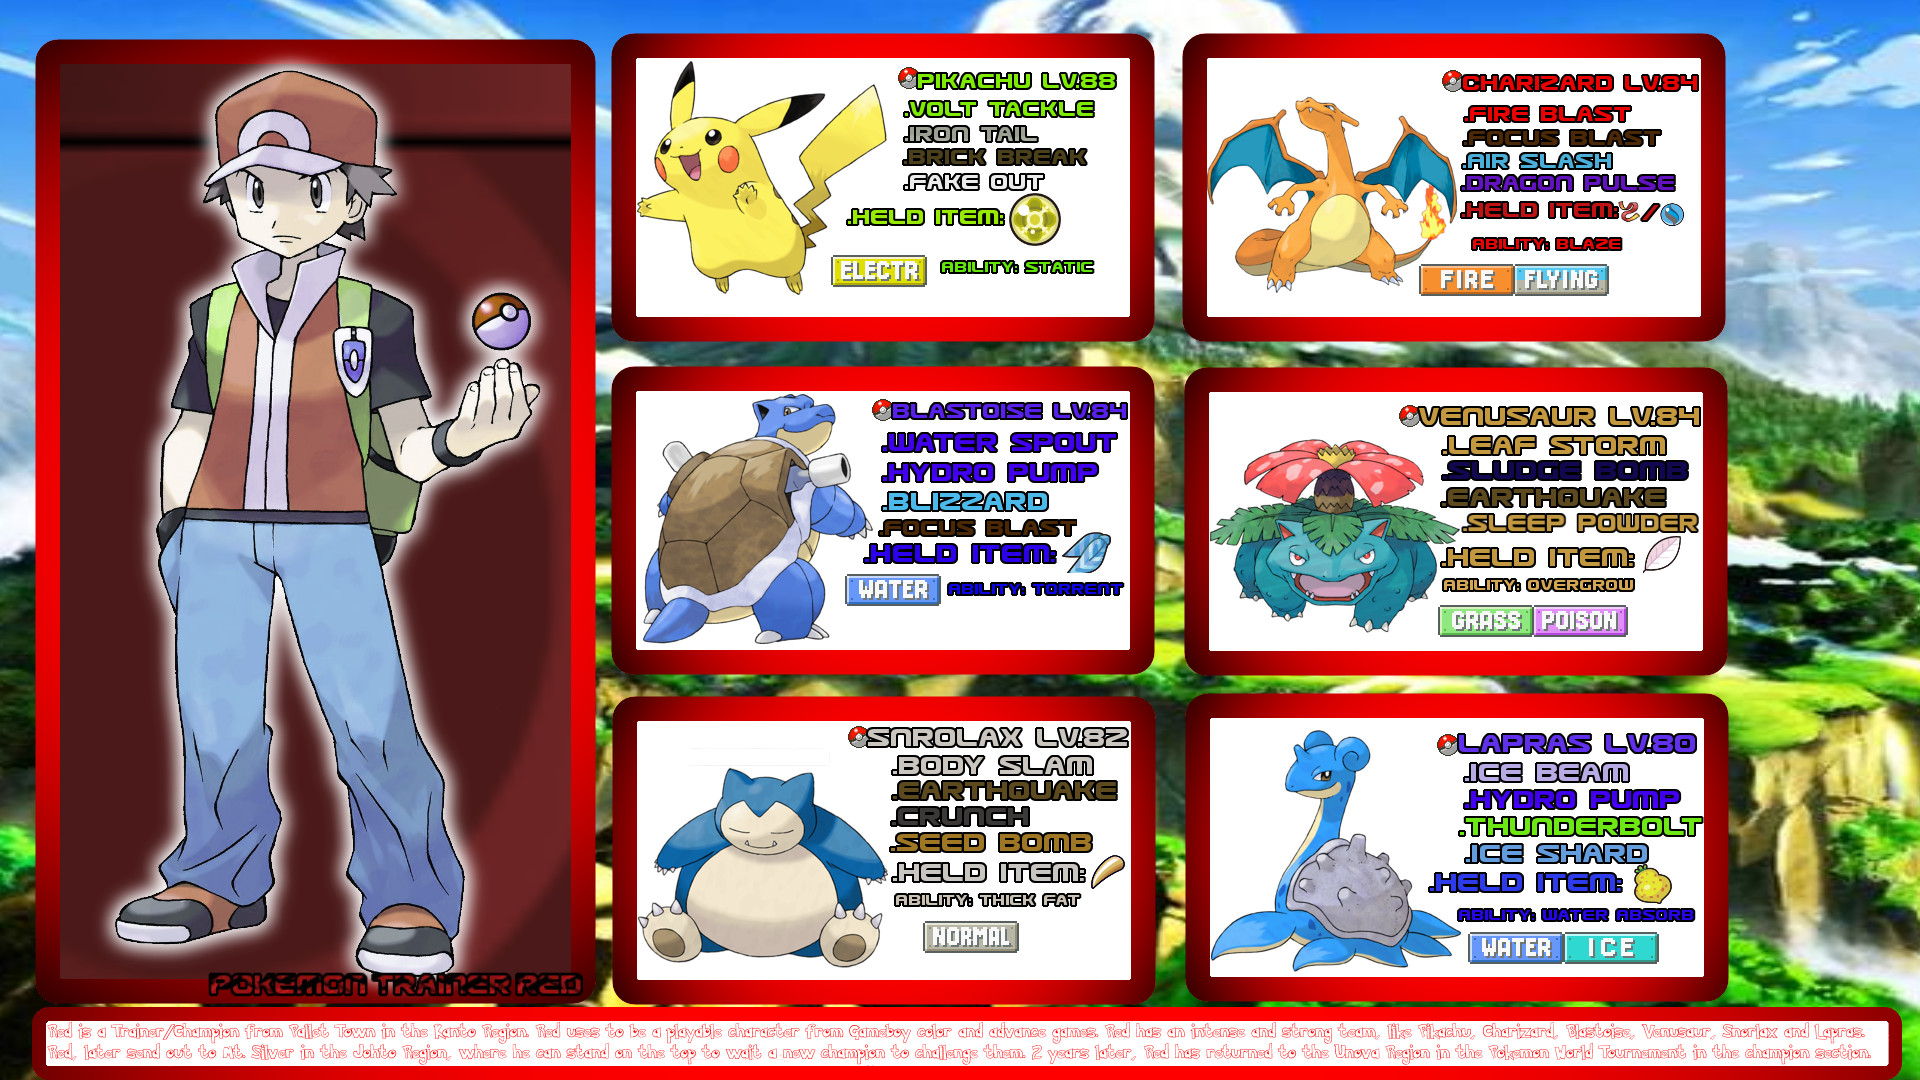 1920x1080 ... PKMN Trainer Red, PKMN team and character profile by MattPlaysVG